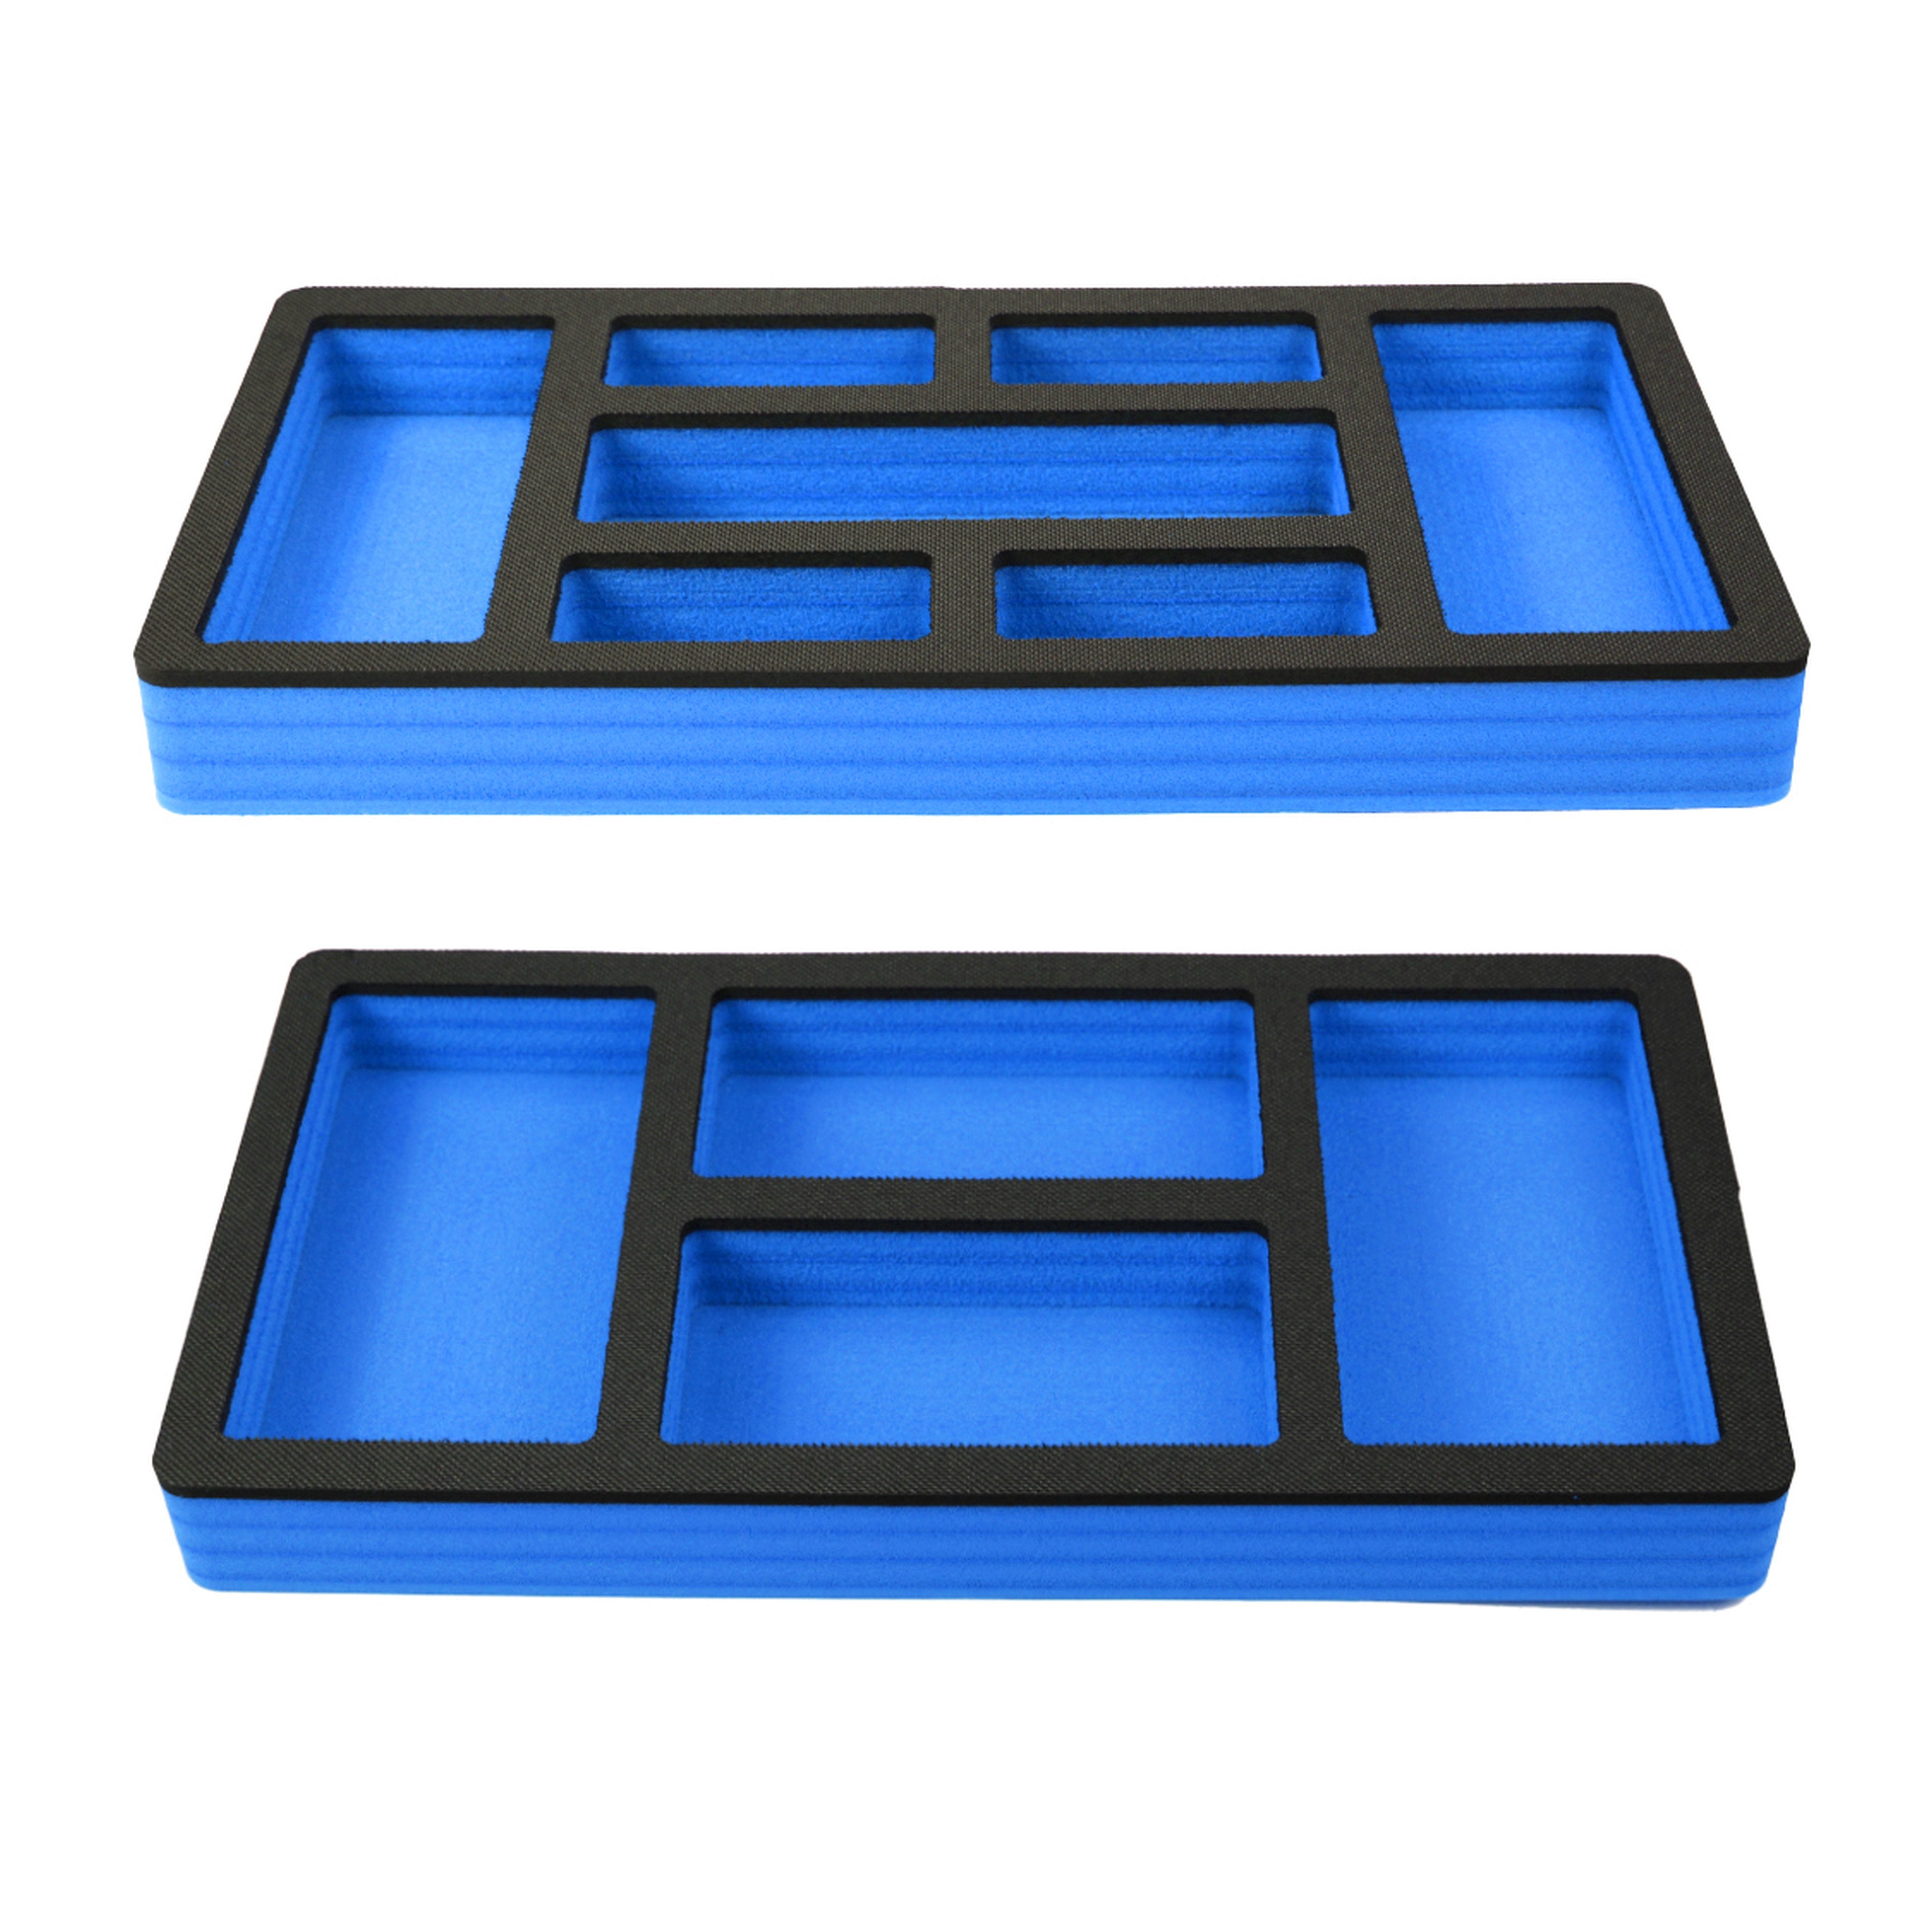 Tool Drawer Organizer 2-Piece Insert Set Blue and Black Durable Foam Non-Slip Anti-Rattle Bin Holder Tray 20 x 10 Inches Large Pockets Fits Craftsman Husky Kobalt Milwaukee and Many Others